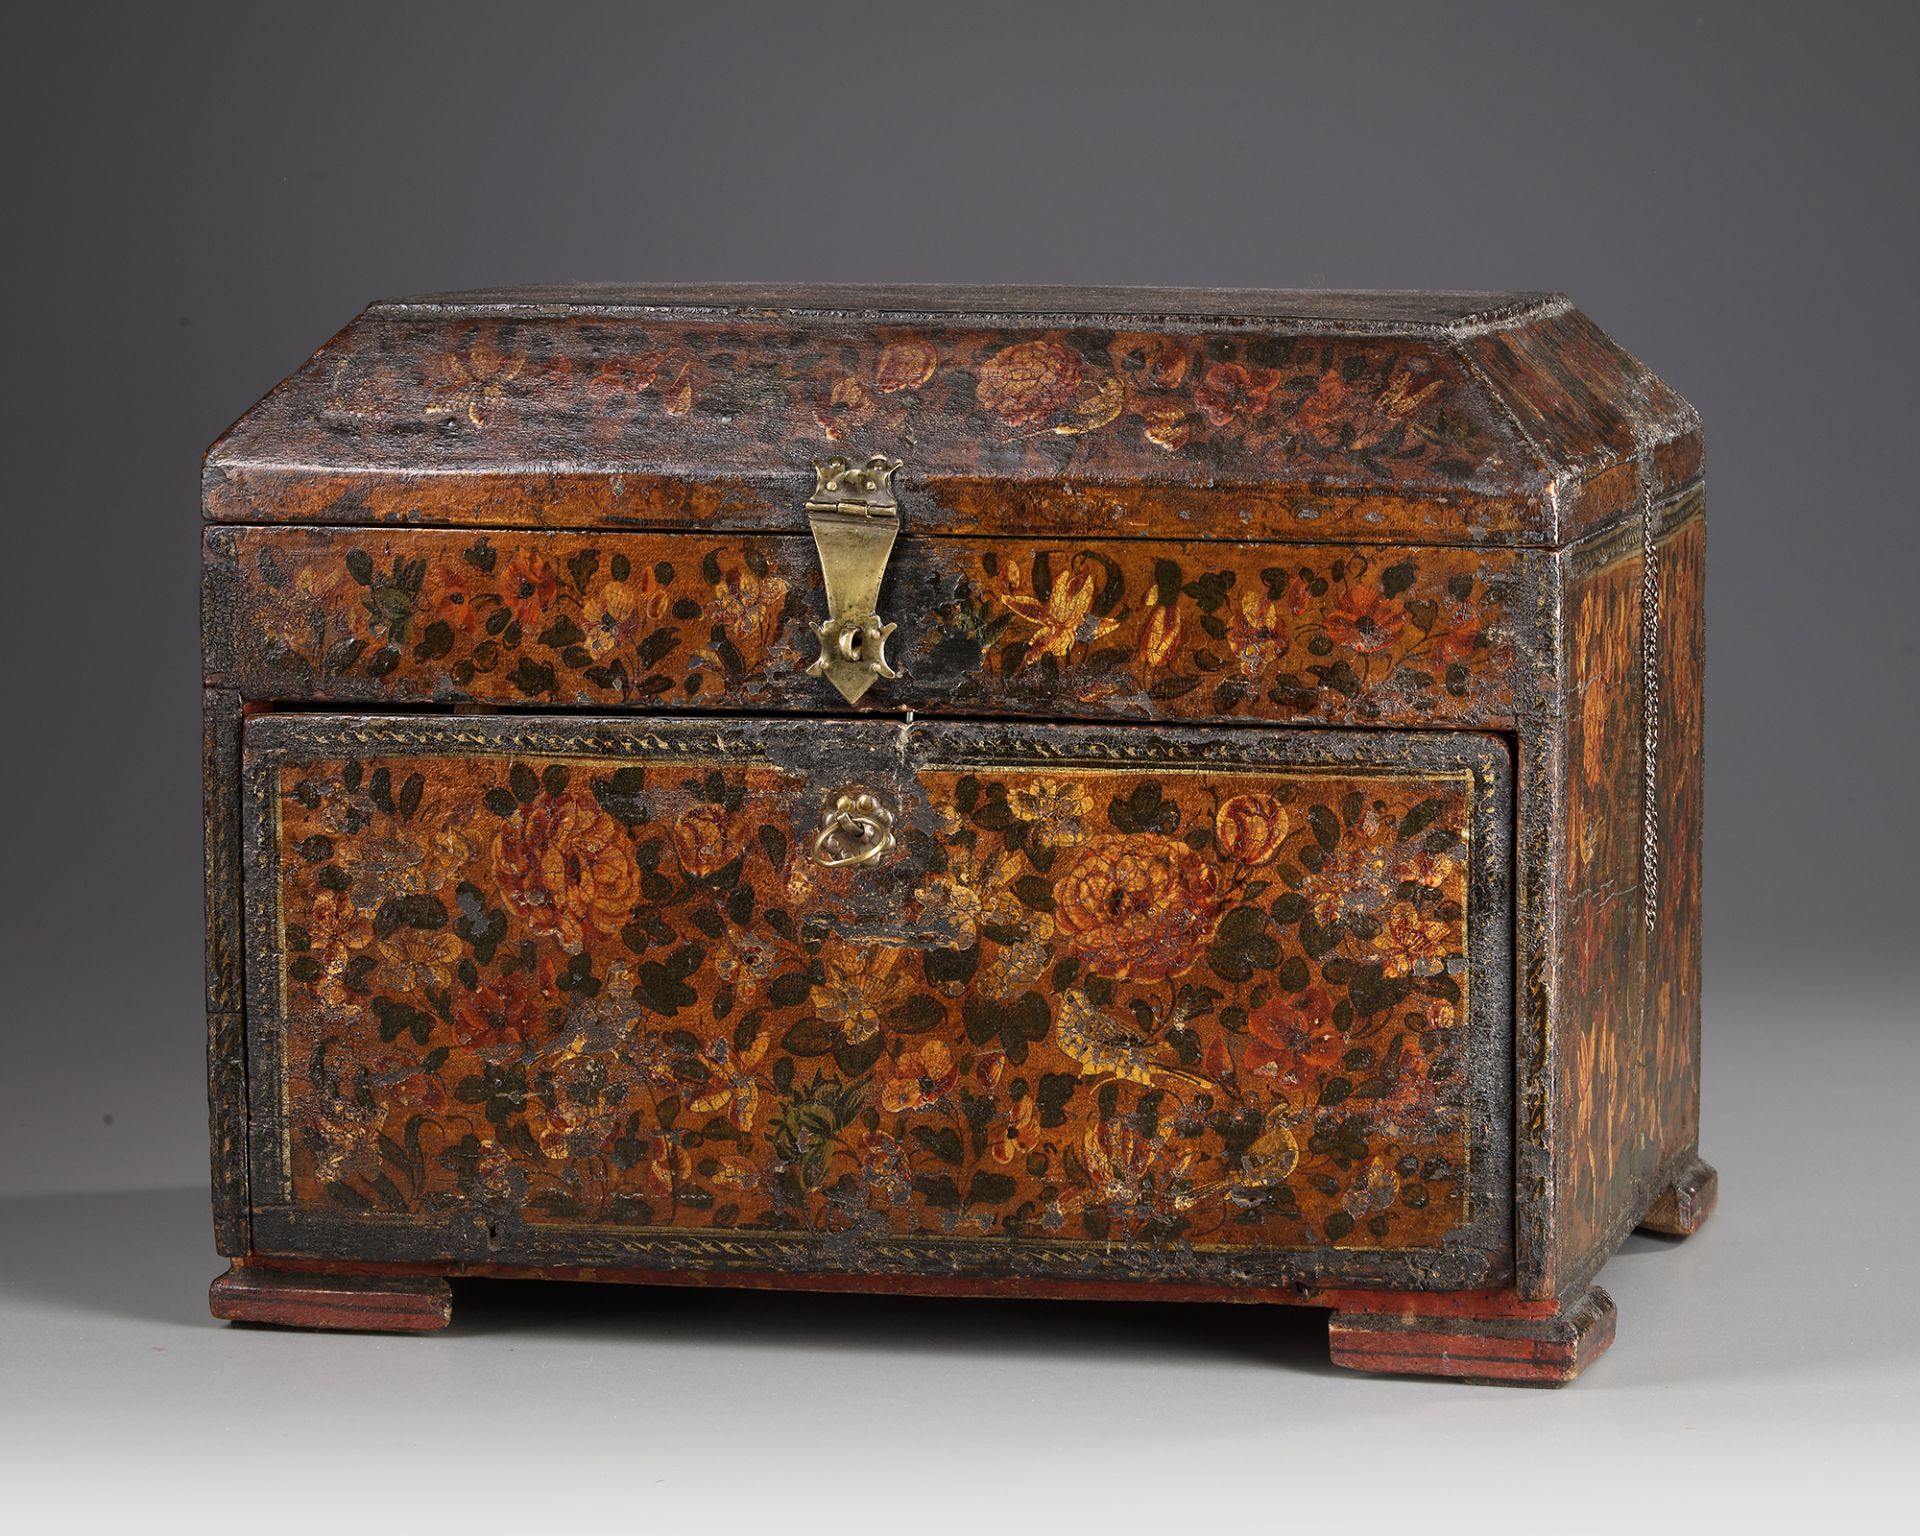 A PERSIAN WOODEN CHEST WITH DRAWERS